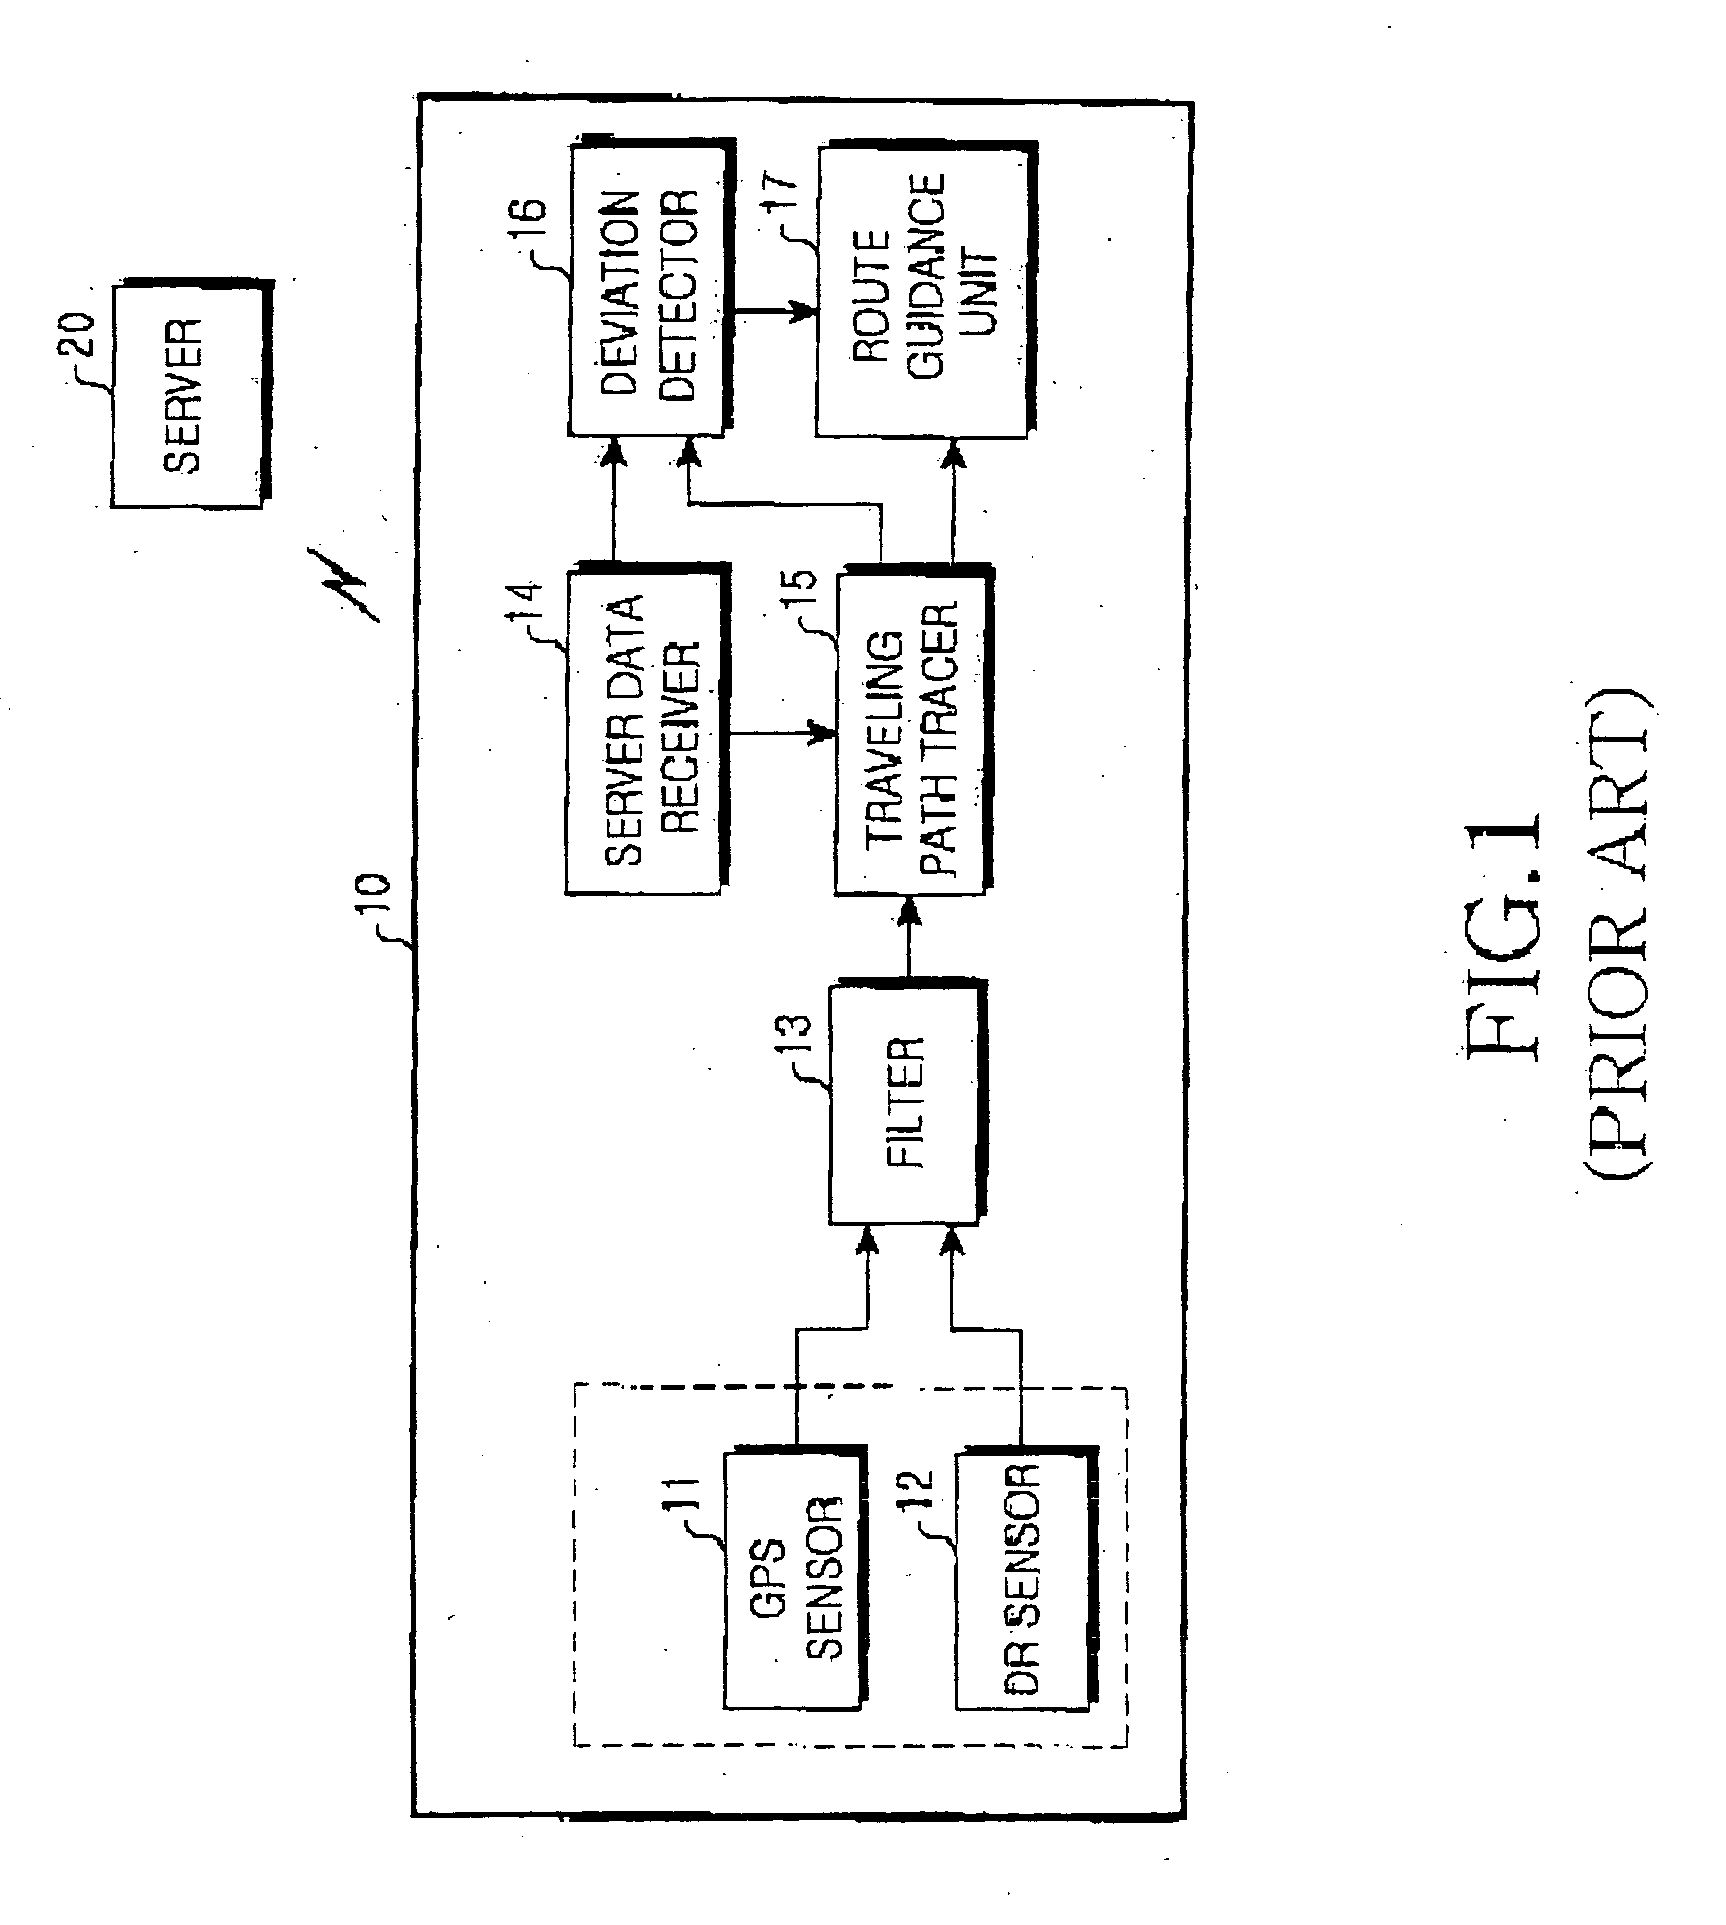 Navigation system and method for detecting deviation of mobile objects from route using same